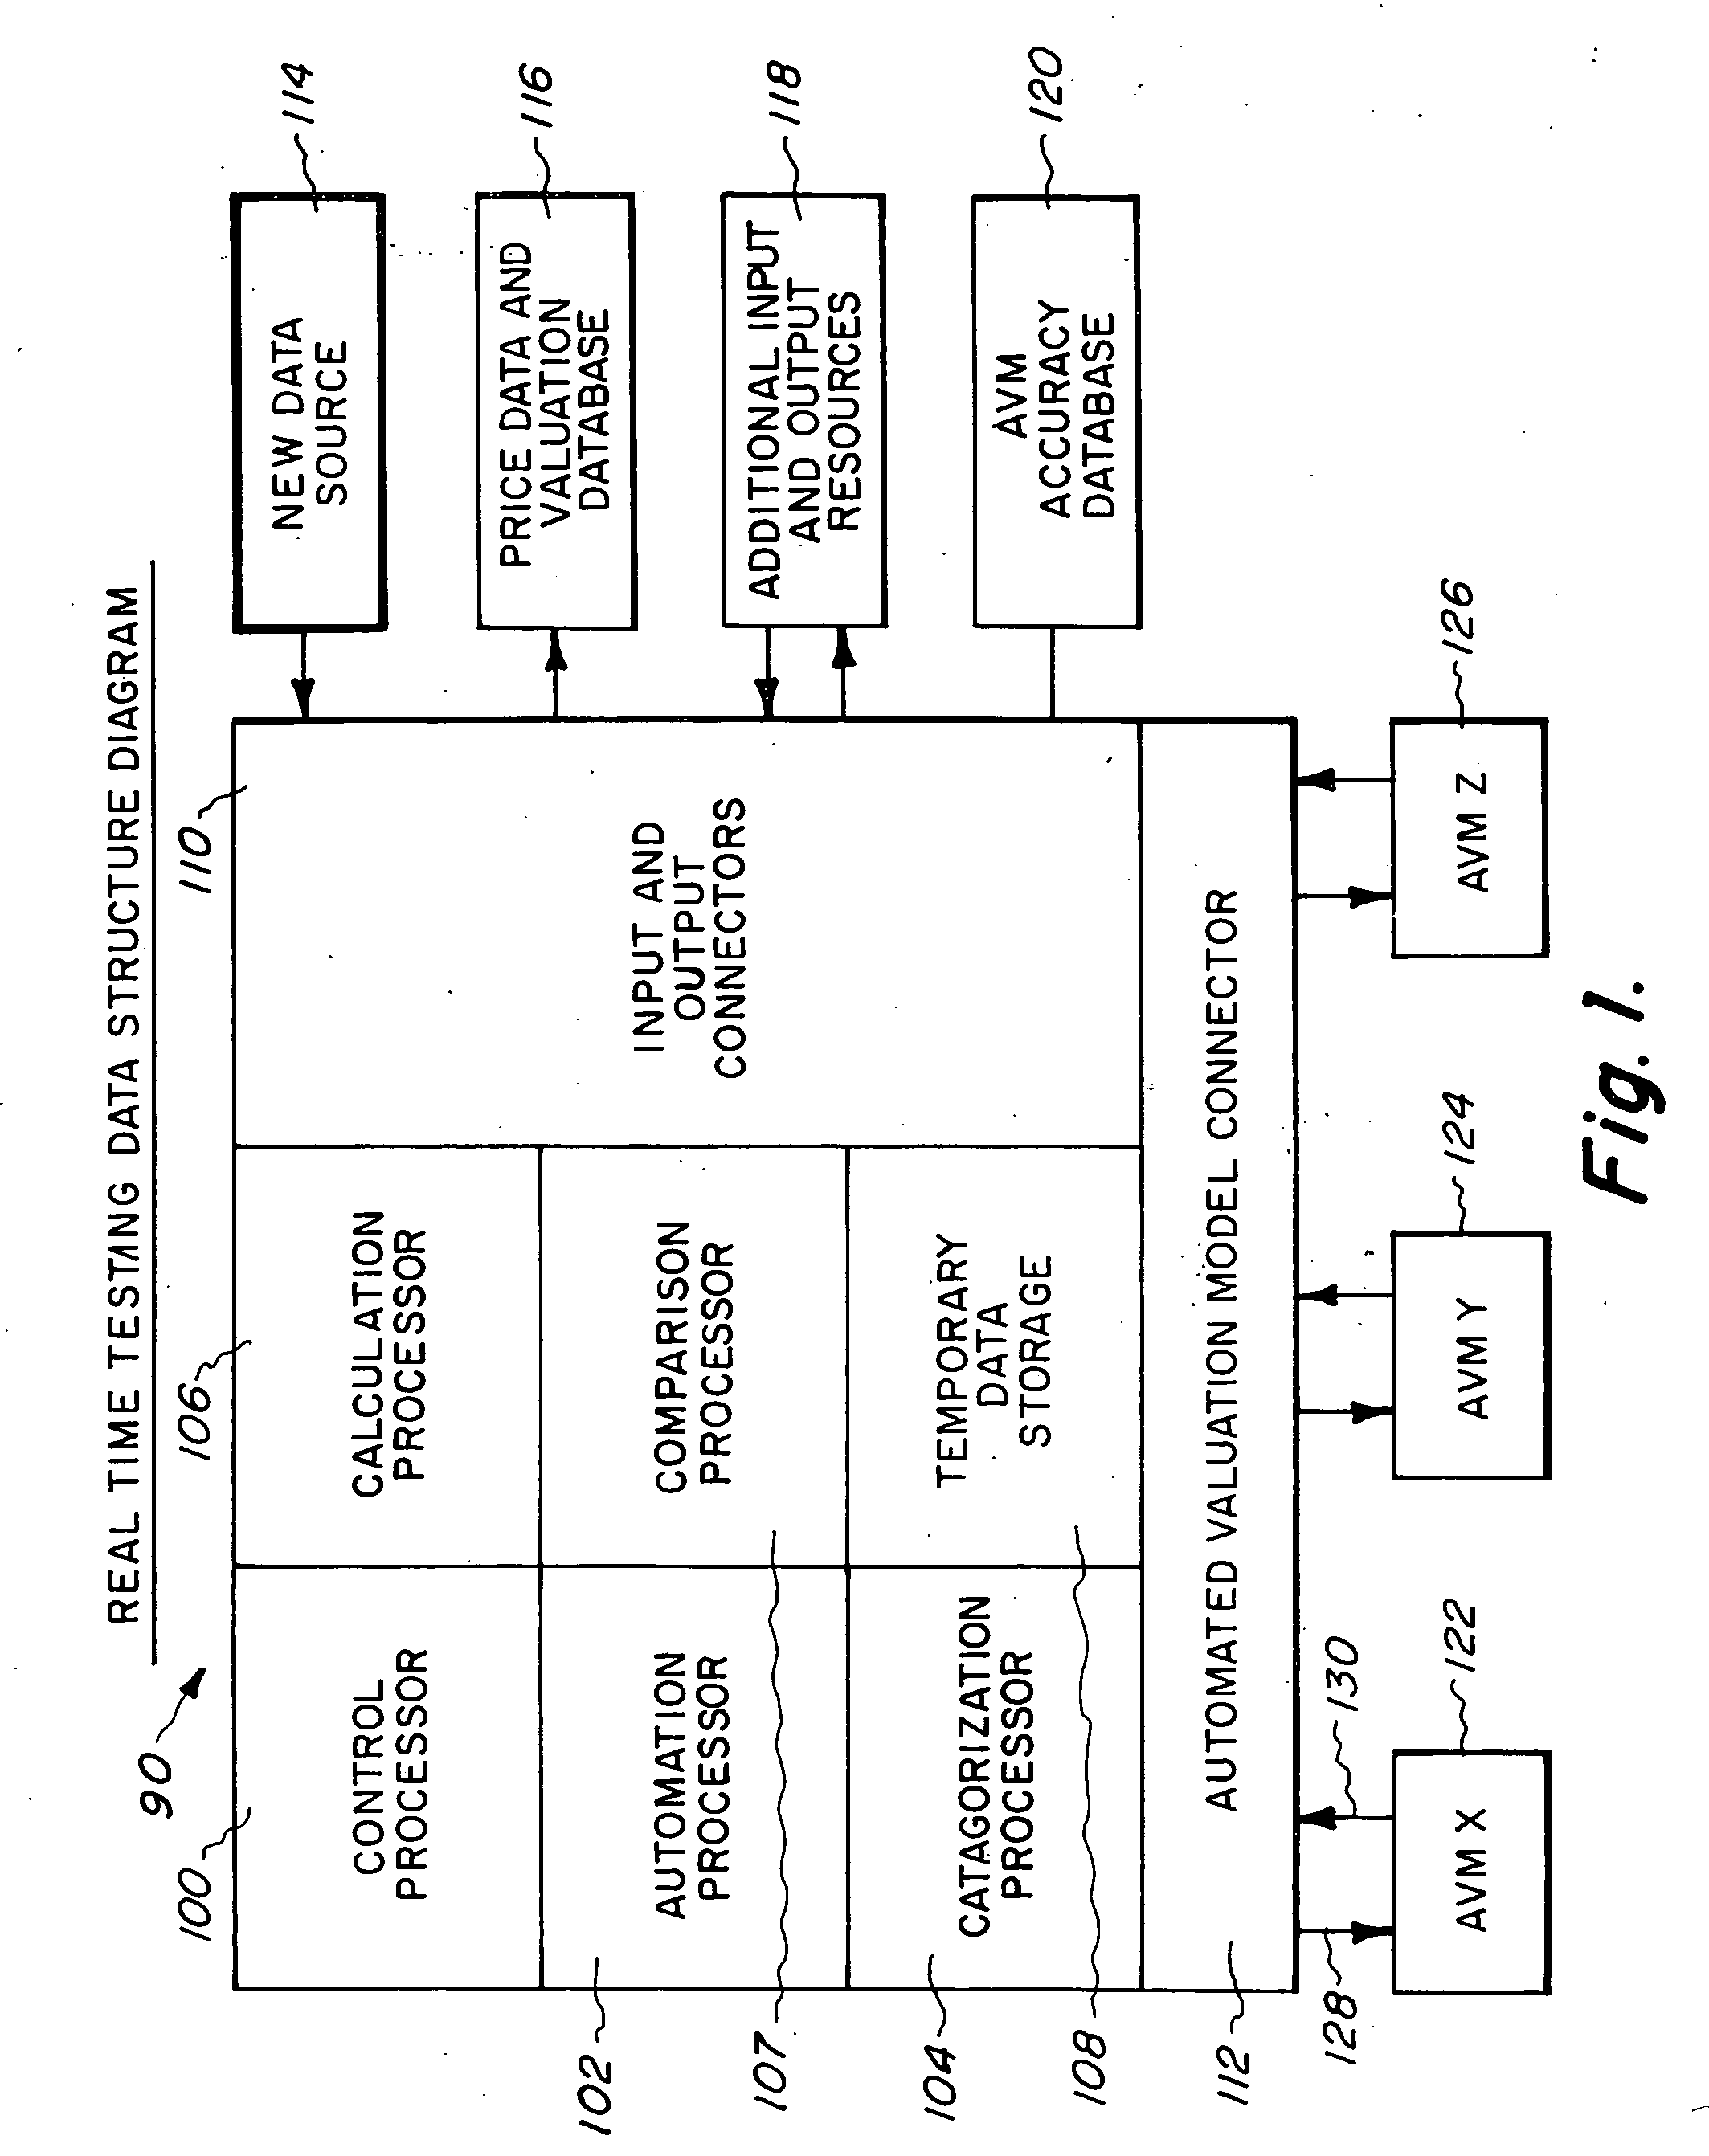 Method and apparatus for testing automated valuation models